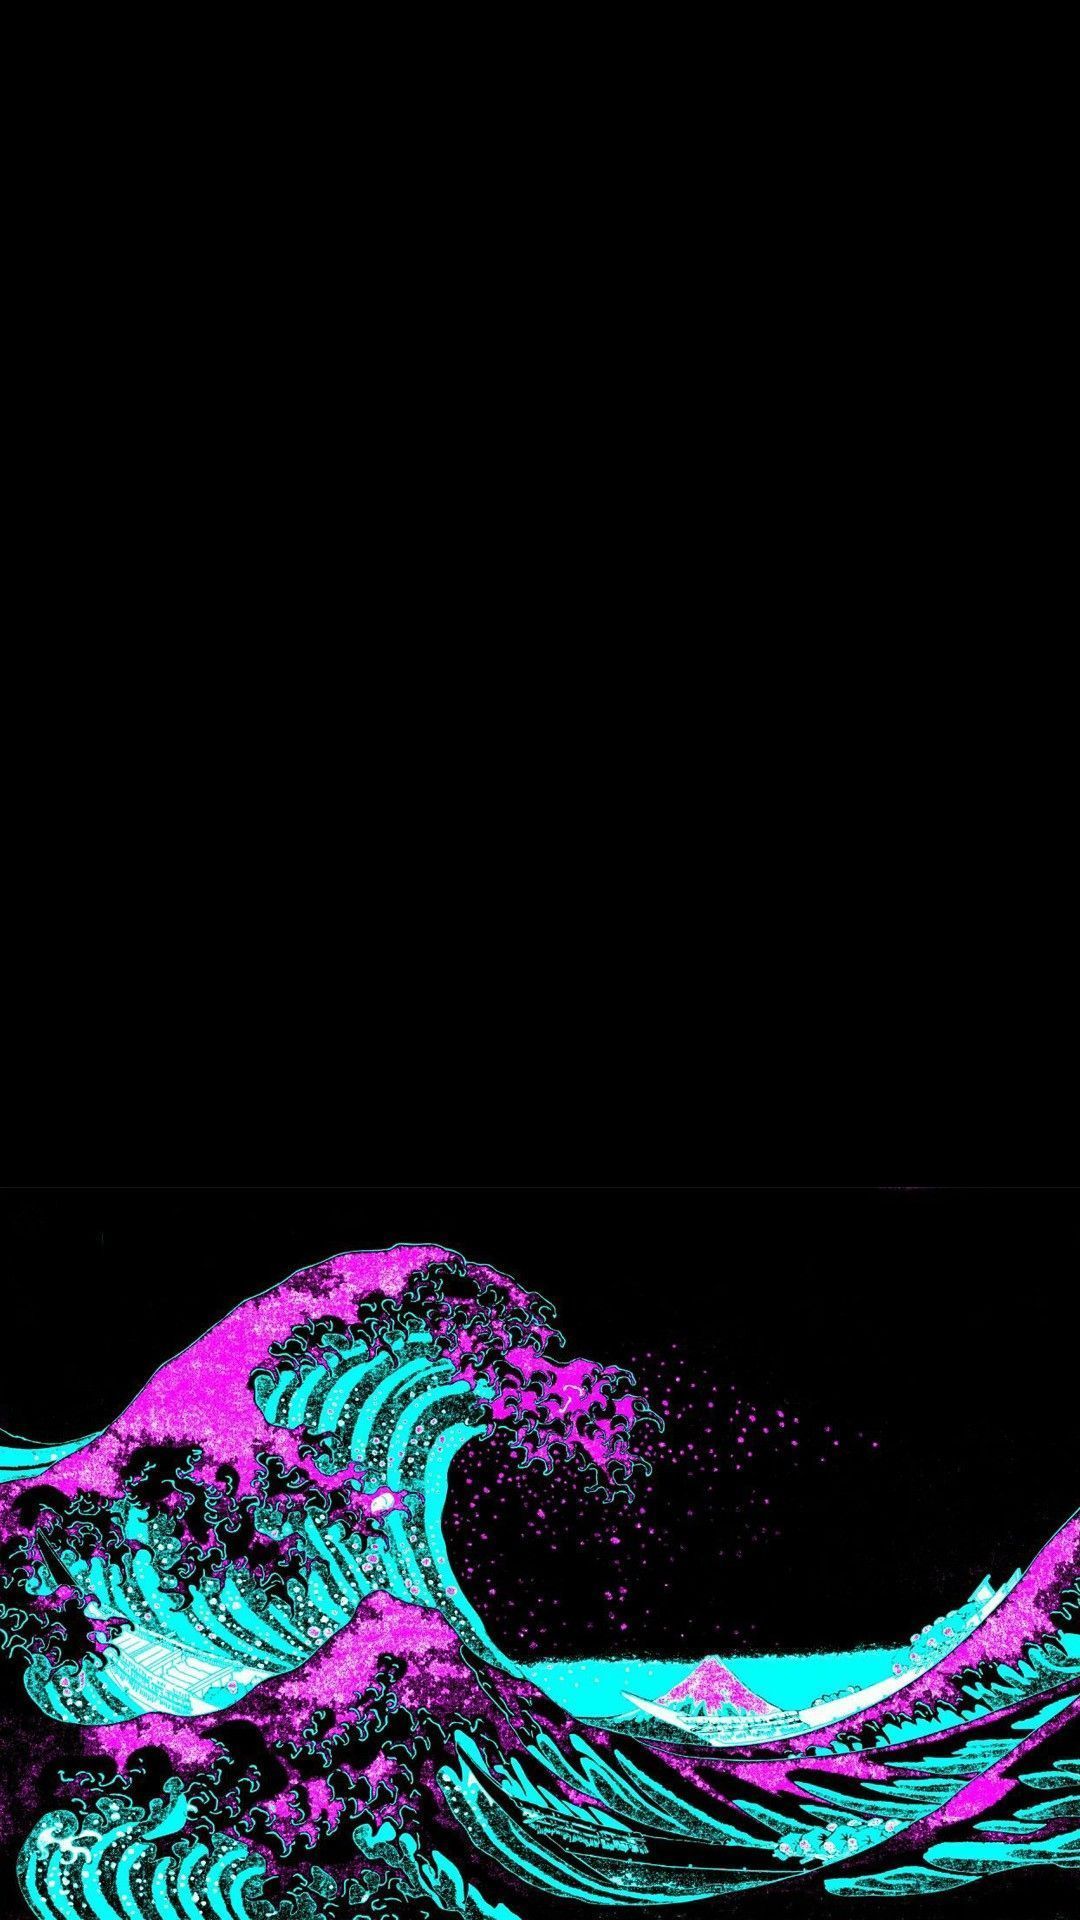 Aesthetic phone wallpaper with neon pink and blue waves - Dark vaporwave, neon, black, The Great Wave off Kanagawa